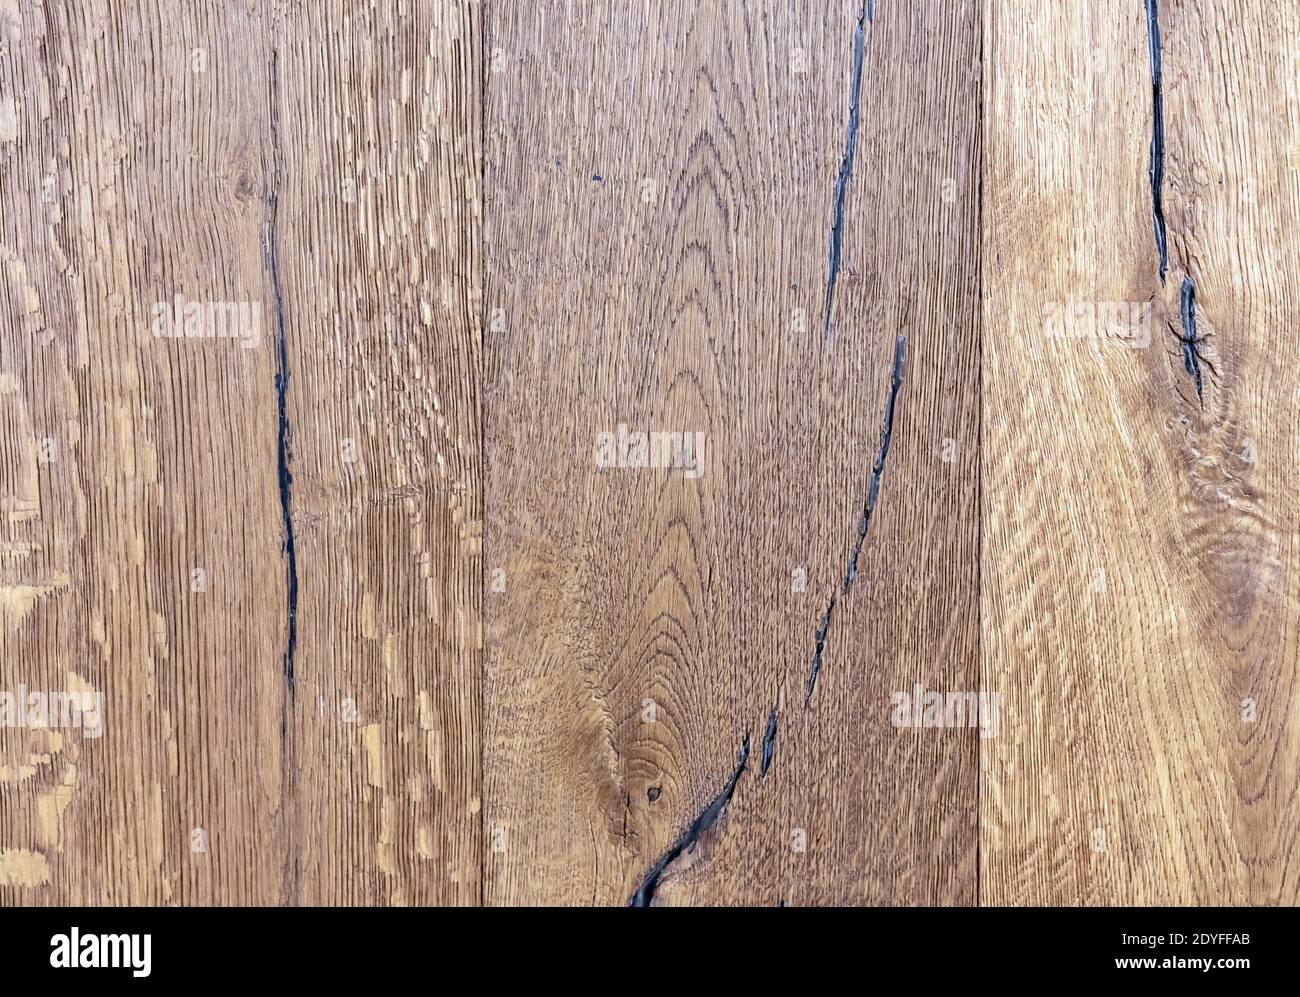 Oak boards with fibers and knots. Wood texture. Stock Photo